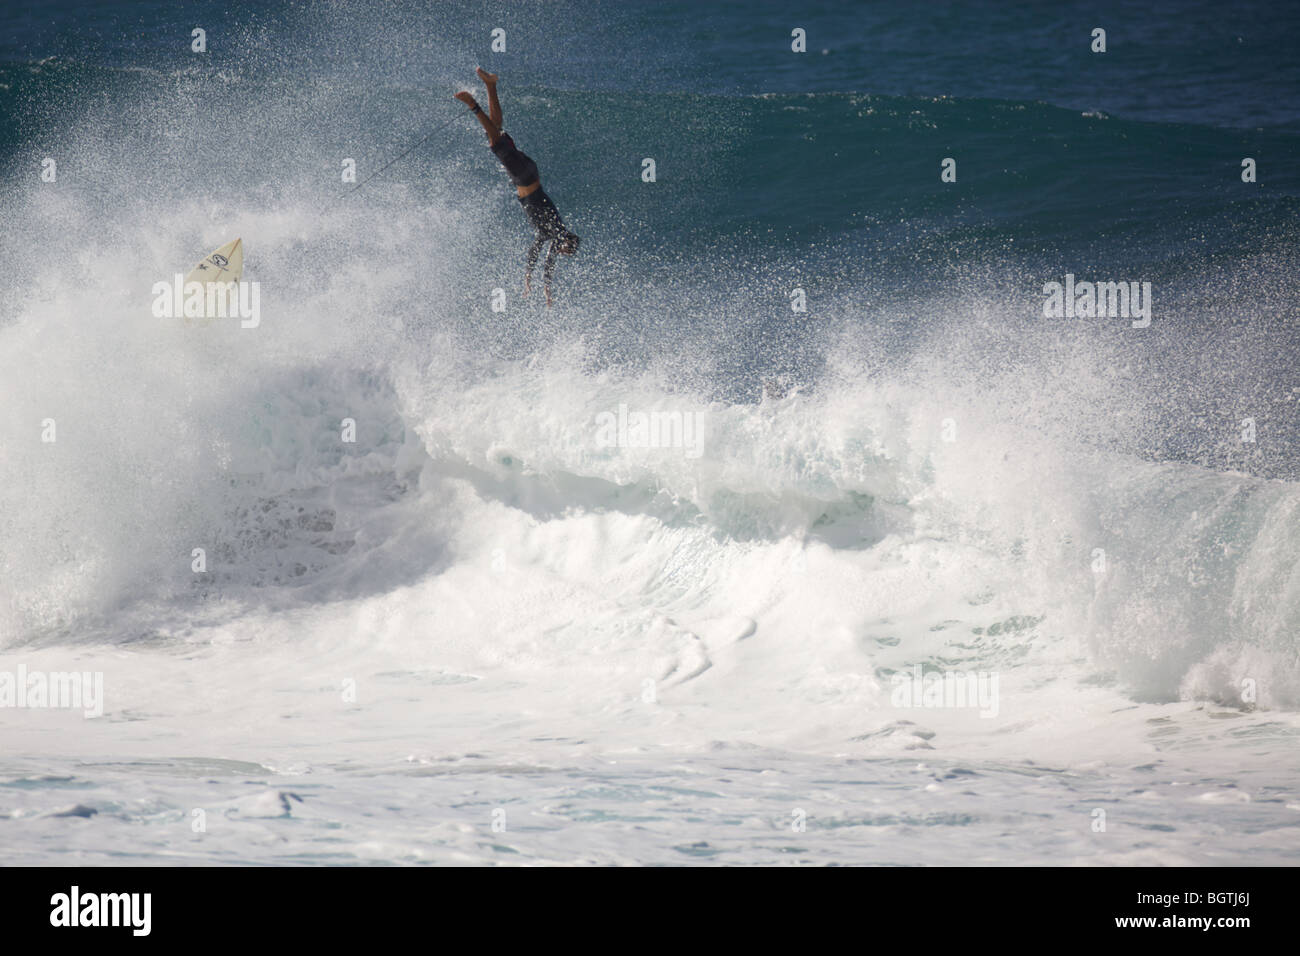 A surfer wipes out on a large wave at Pipleline, Oahu, Hawaii Stock Photo